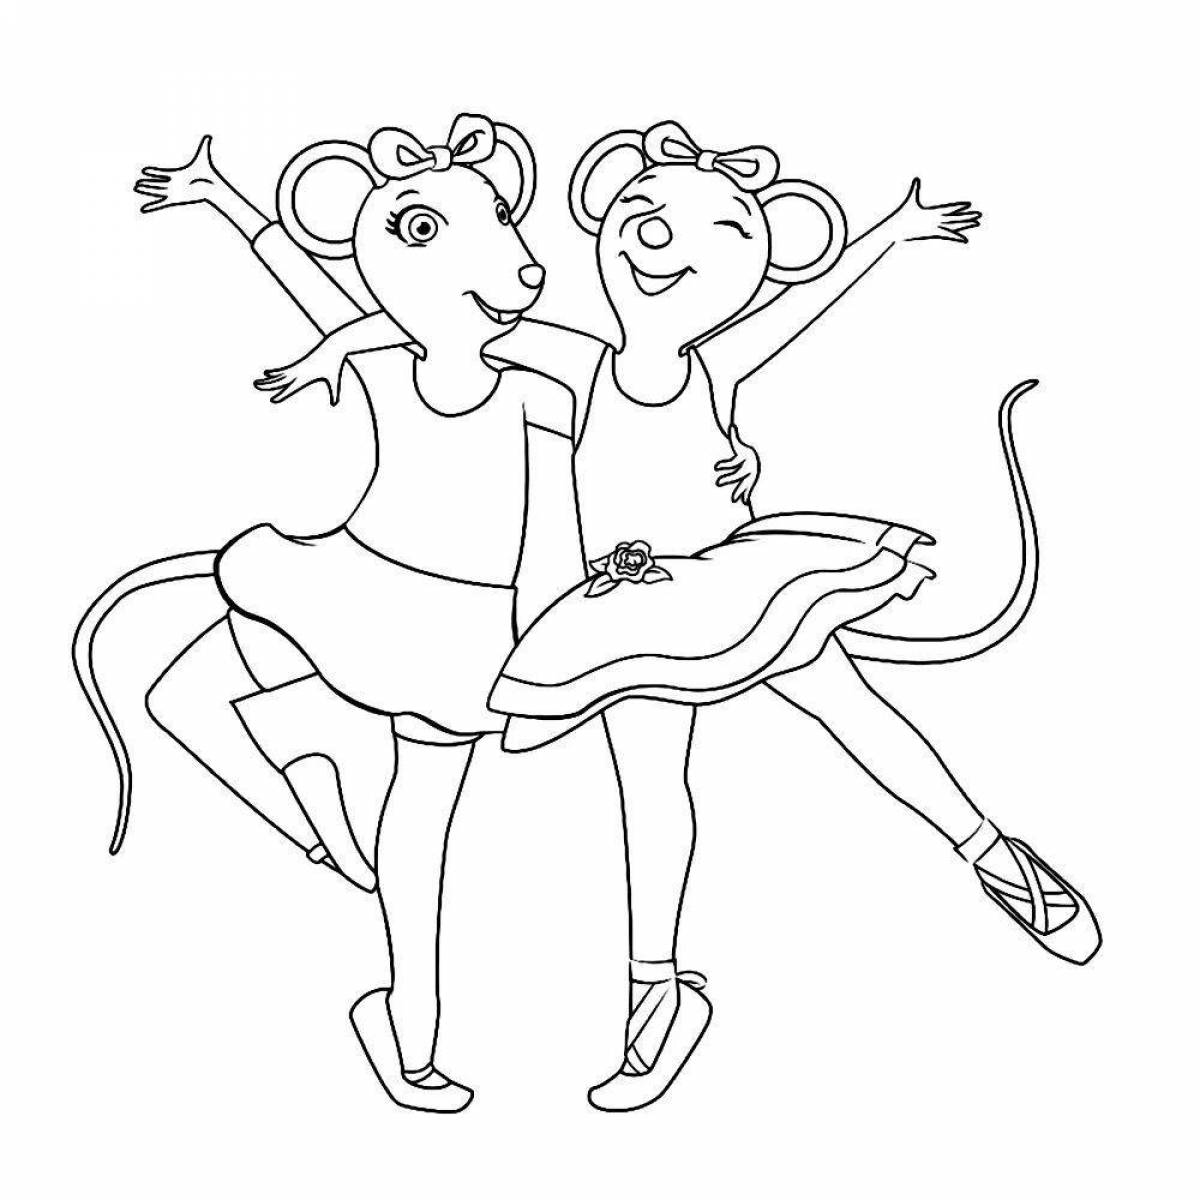 Exciting dance coloring book